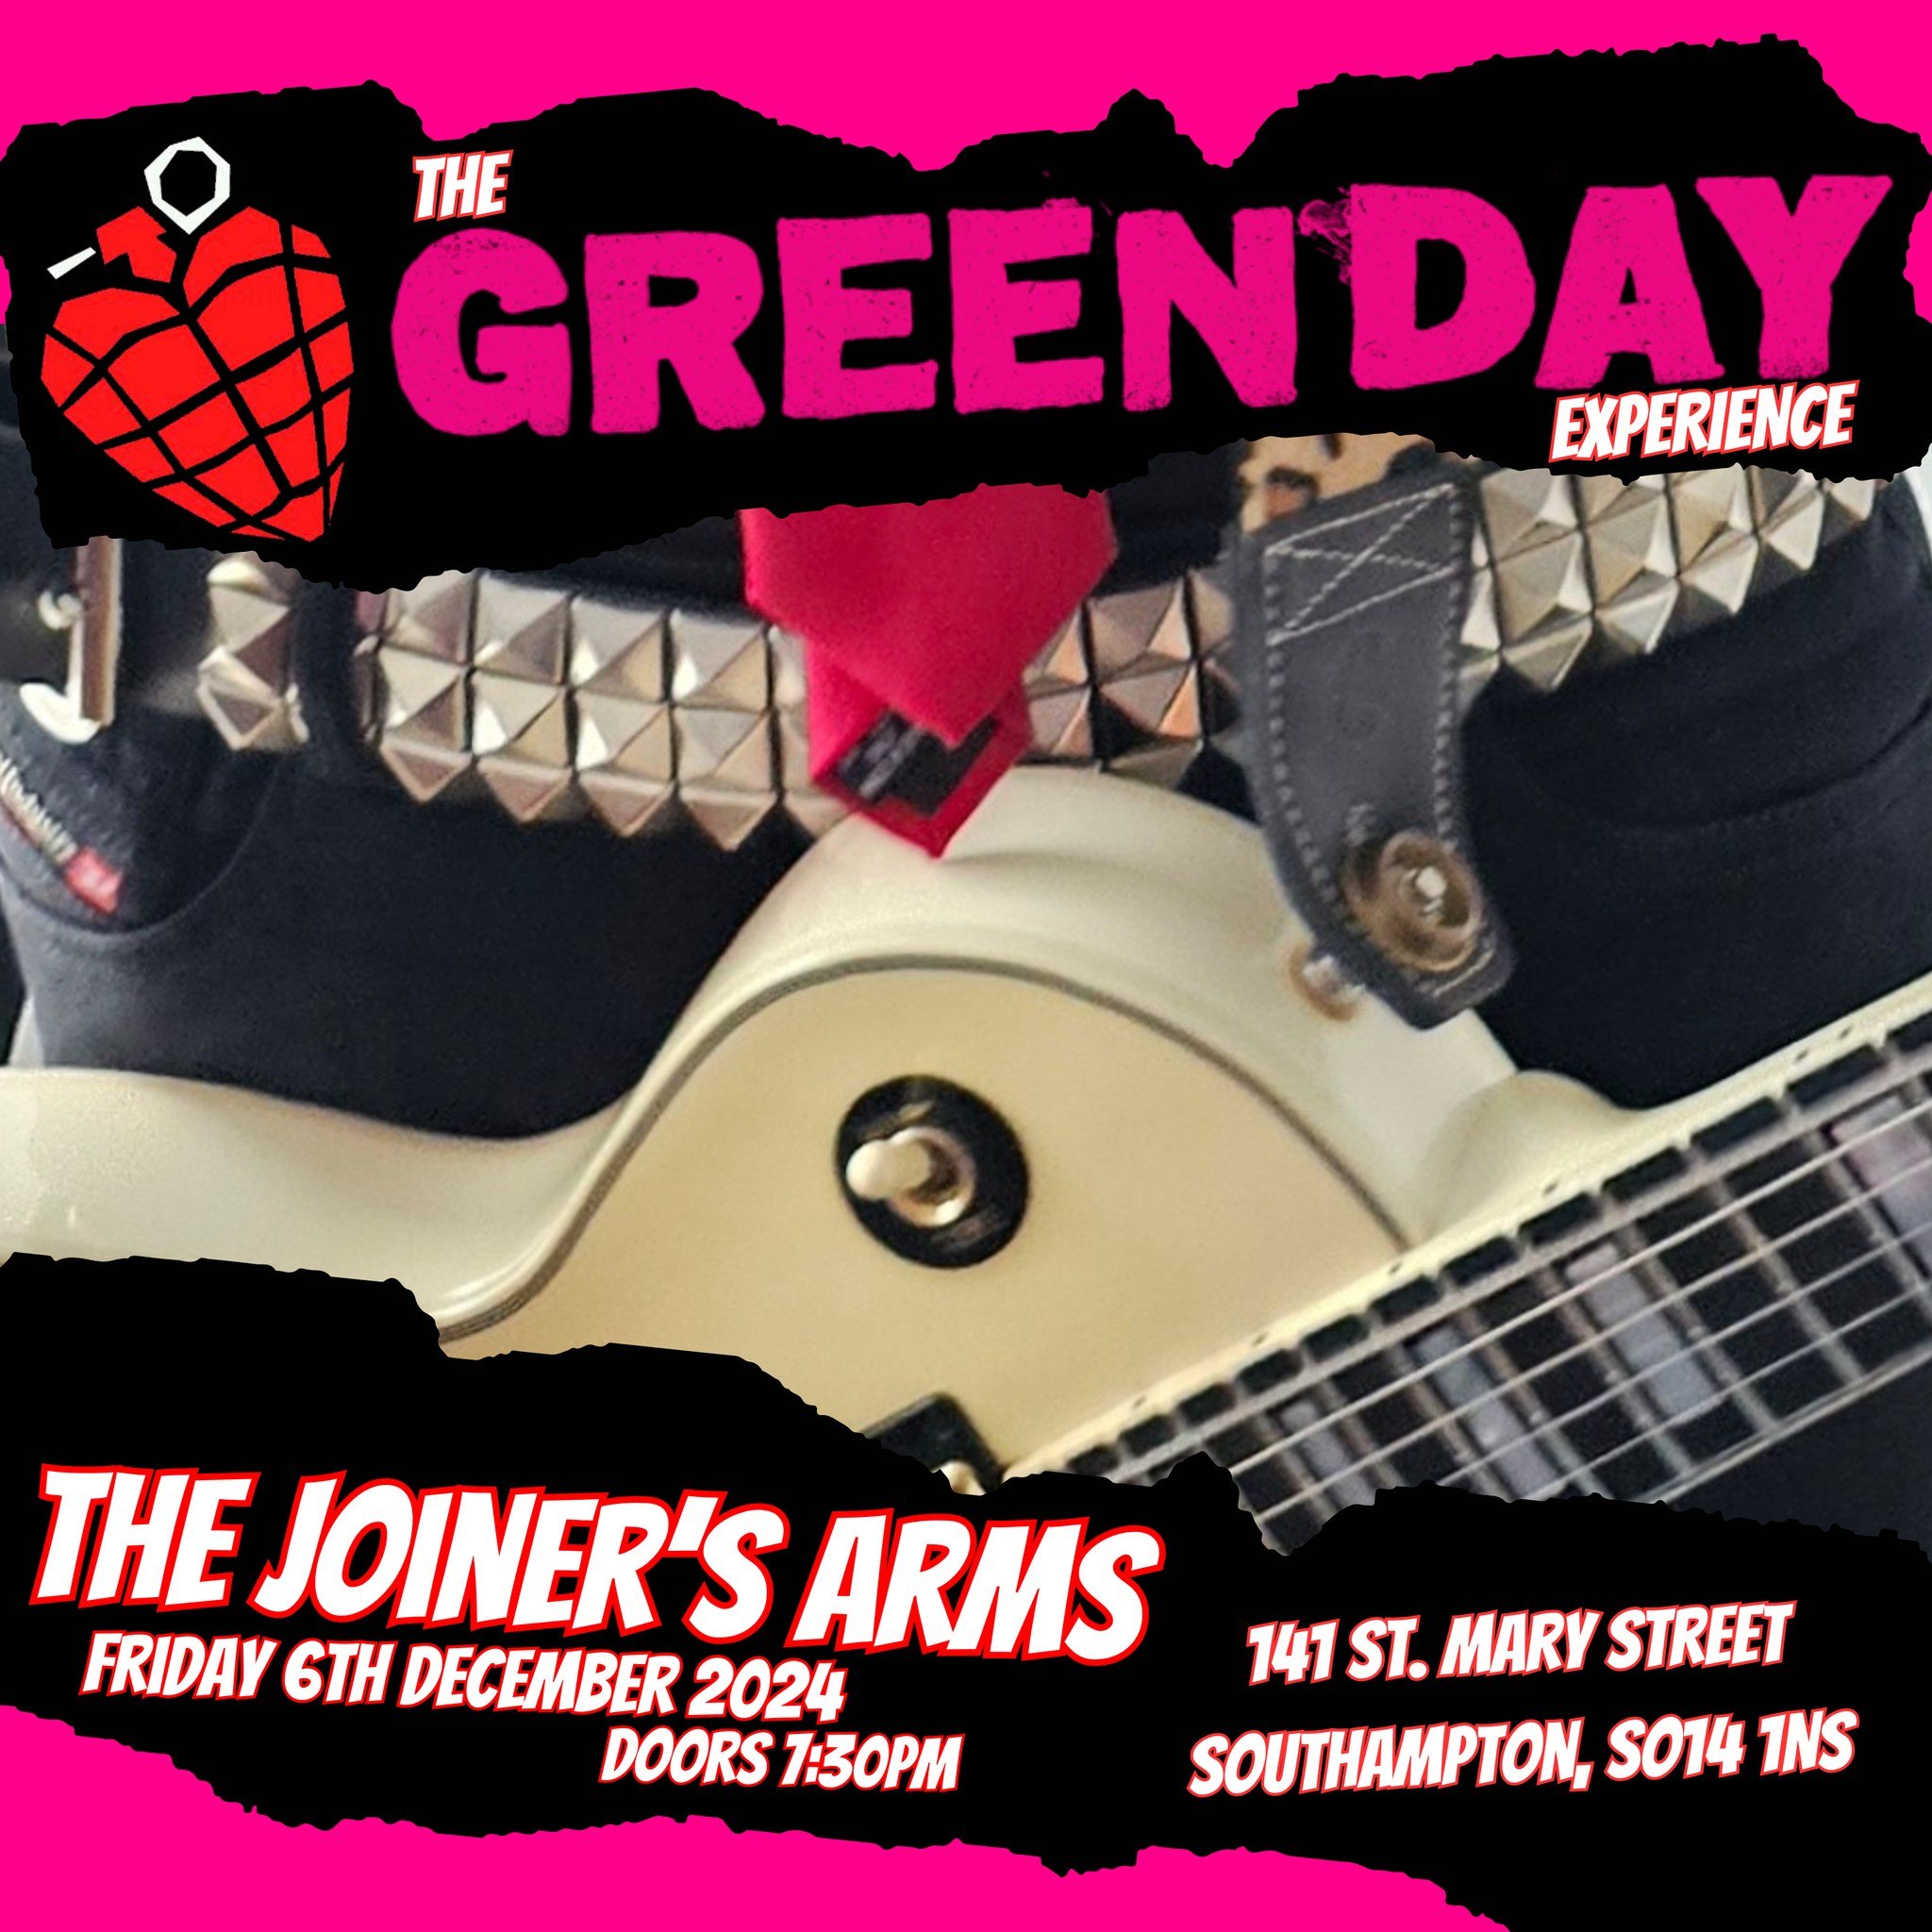 The amended date folks....
@thejoinersarms 
Friday 6th December 2024
Doors open 7:30pm
#thegreendayexperience #tribute #thejoiners #southampton